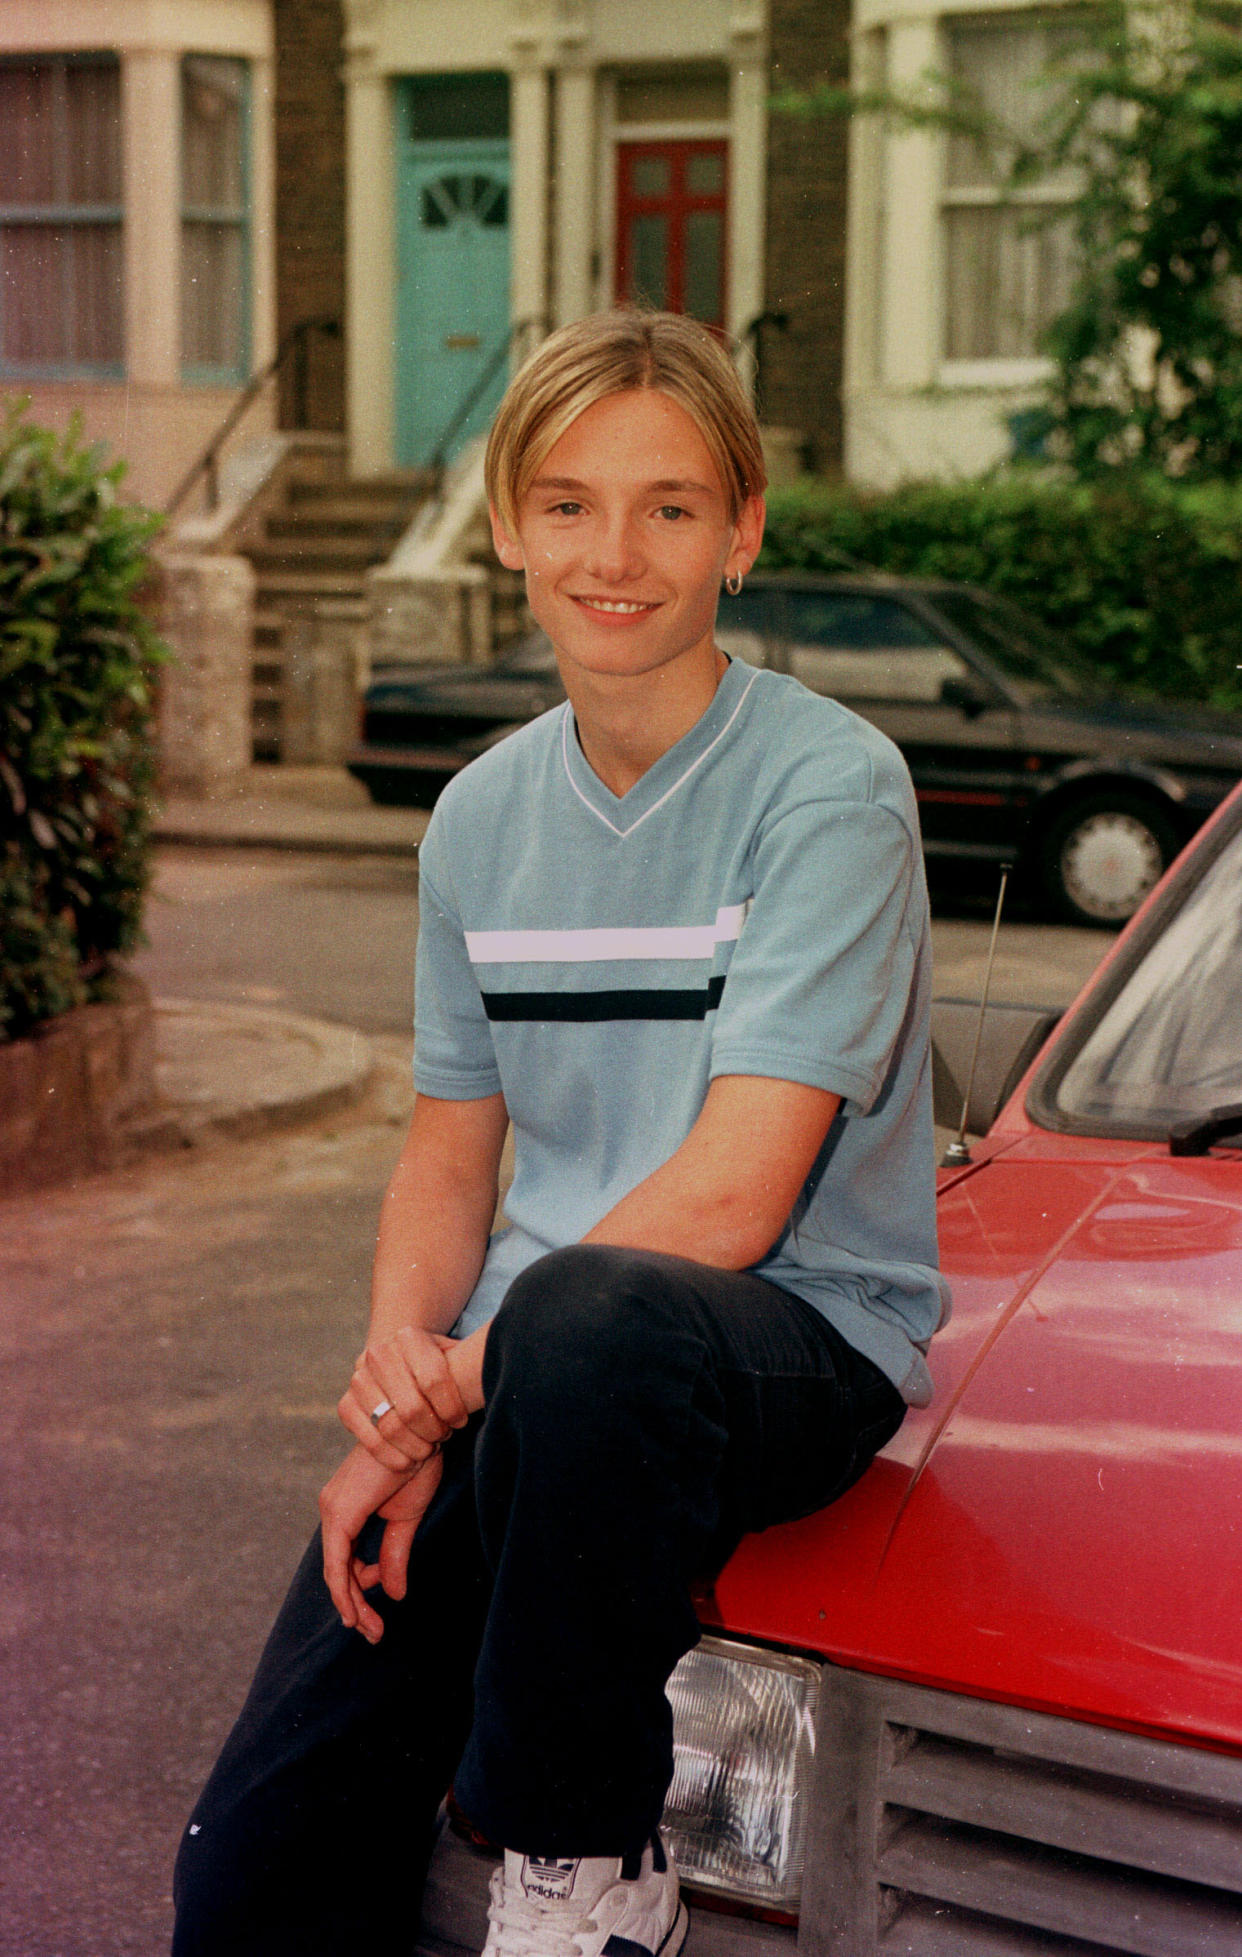 Jack Ryder joined EastEnders at the age of 16. (Photo by Ben Curtis - PA Images/PA Images via Getty Images)